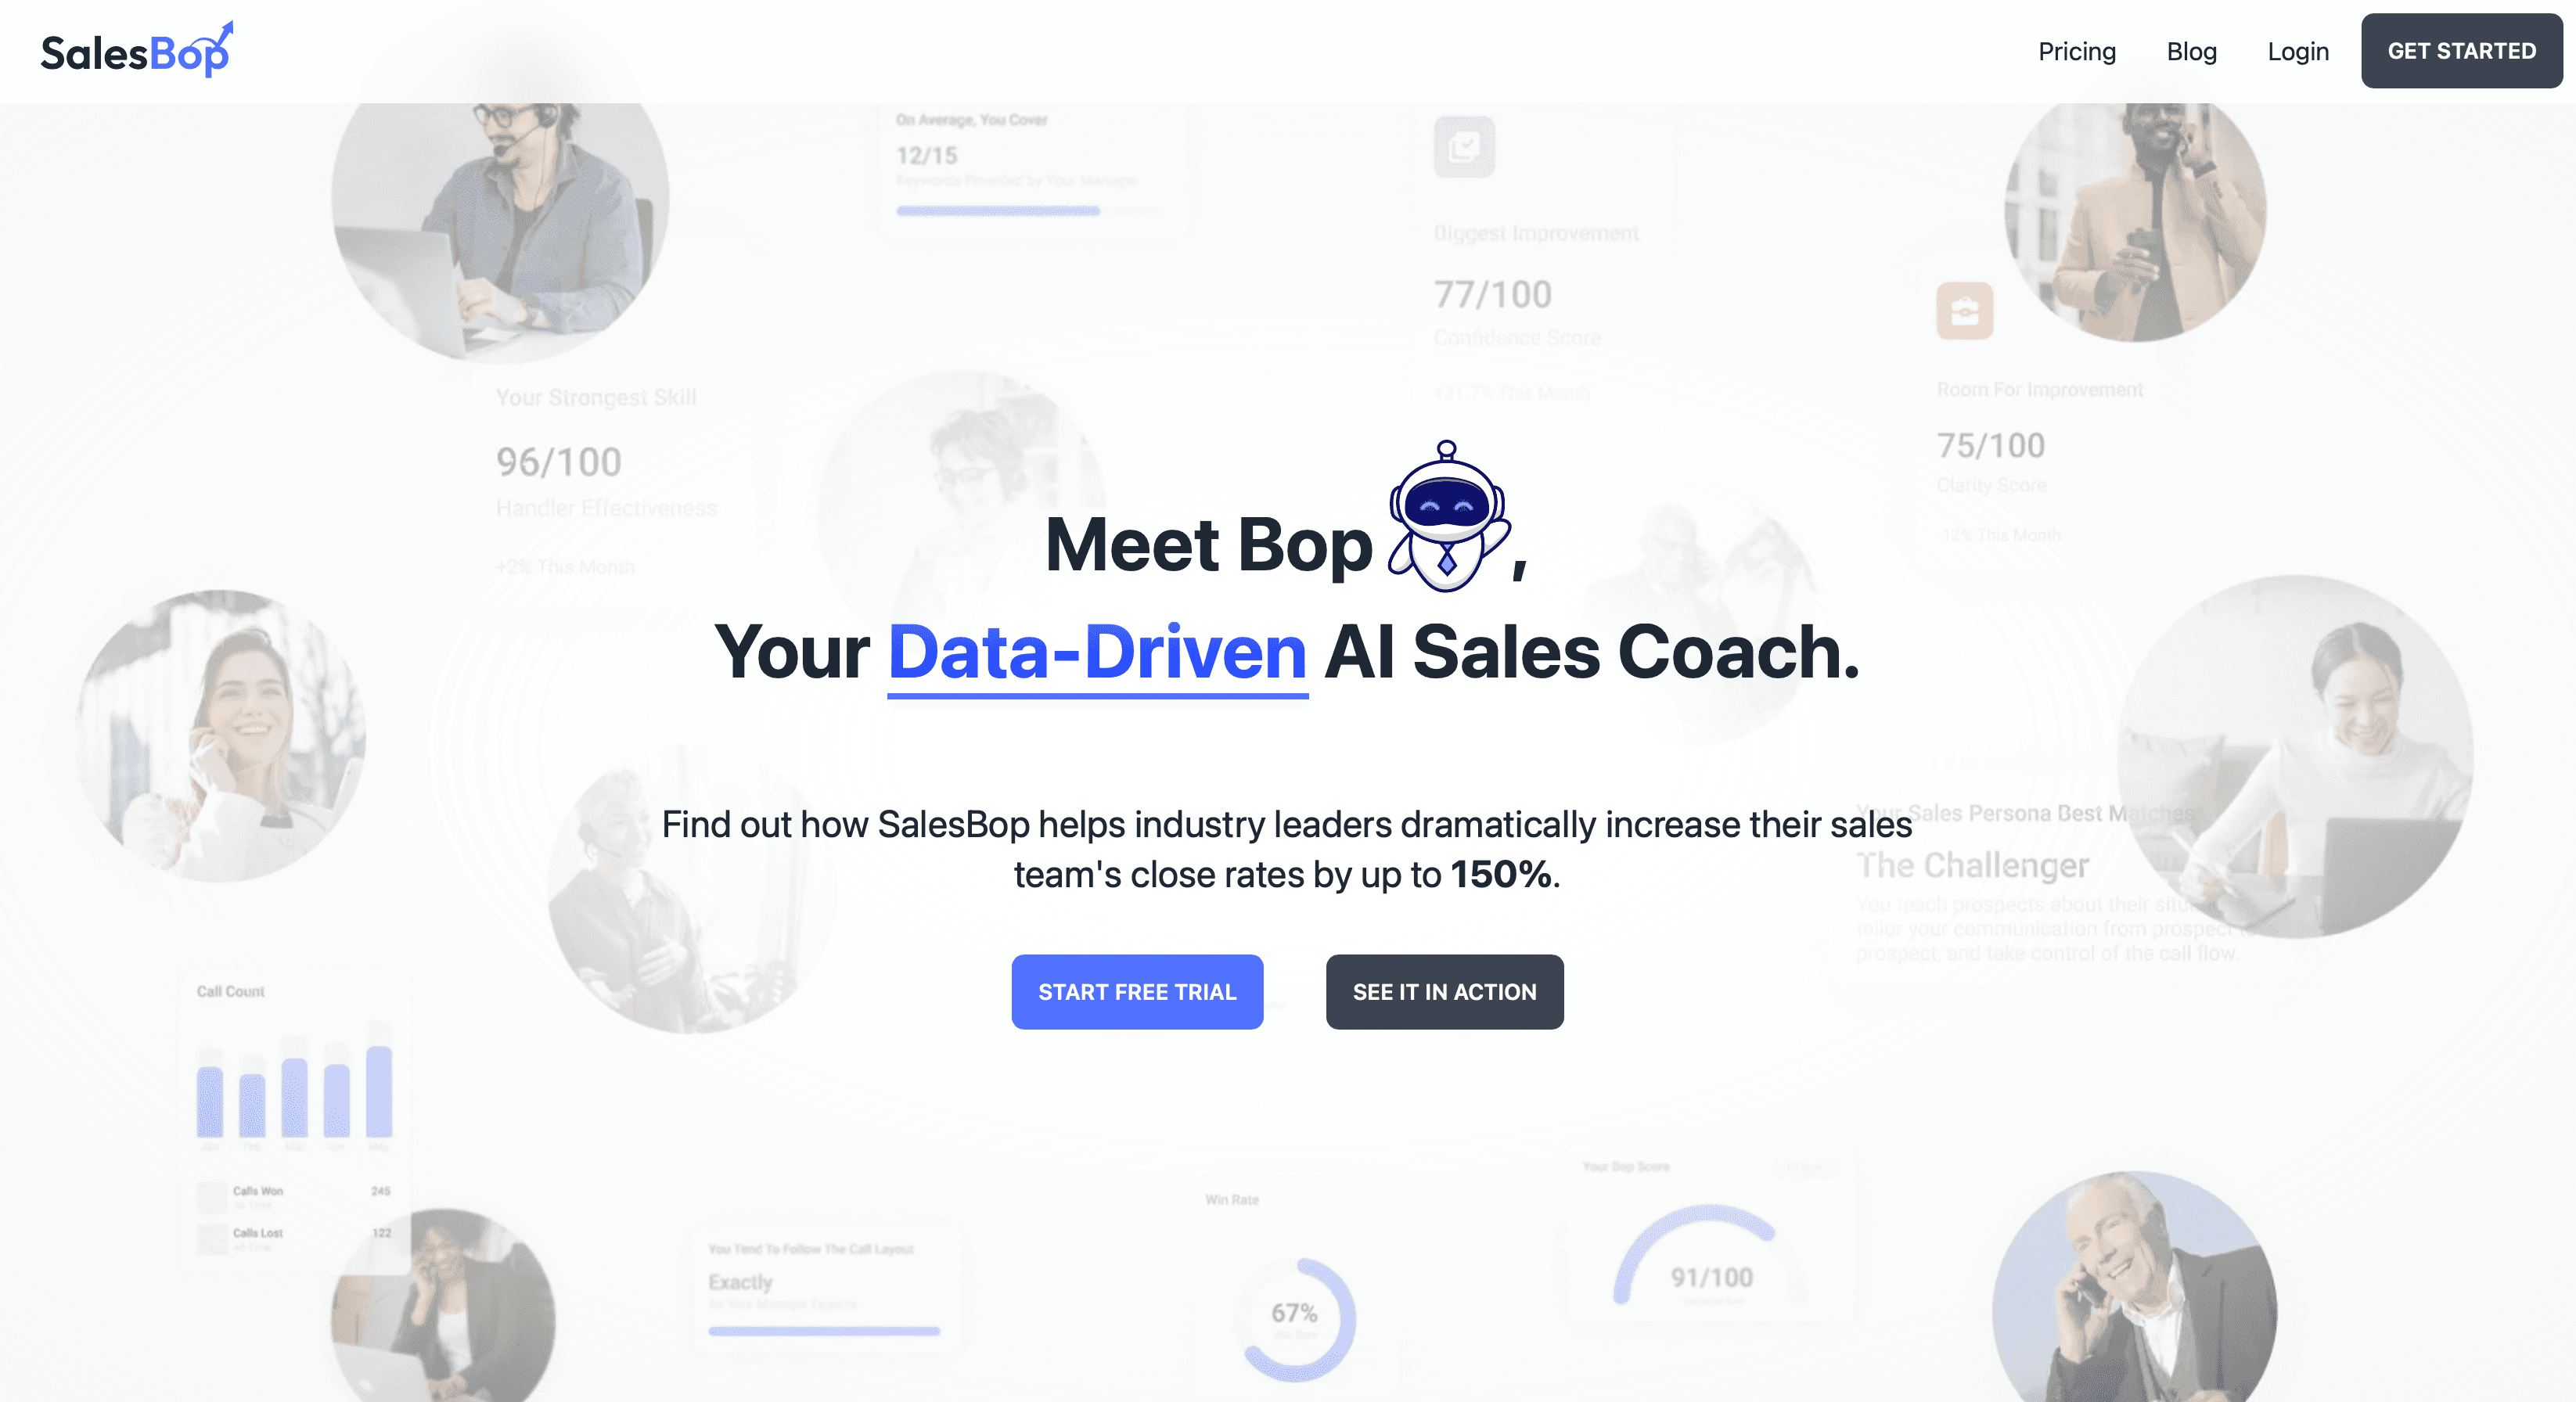 A screenshot of the SalesBop landing page.